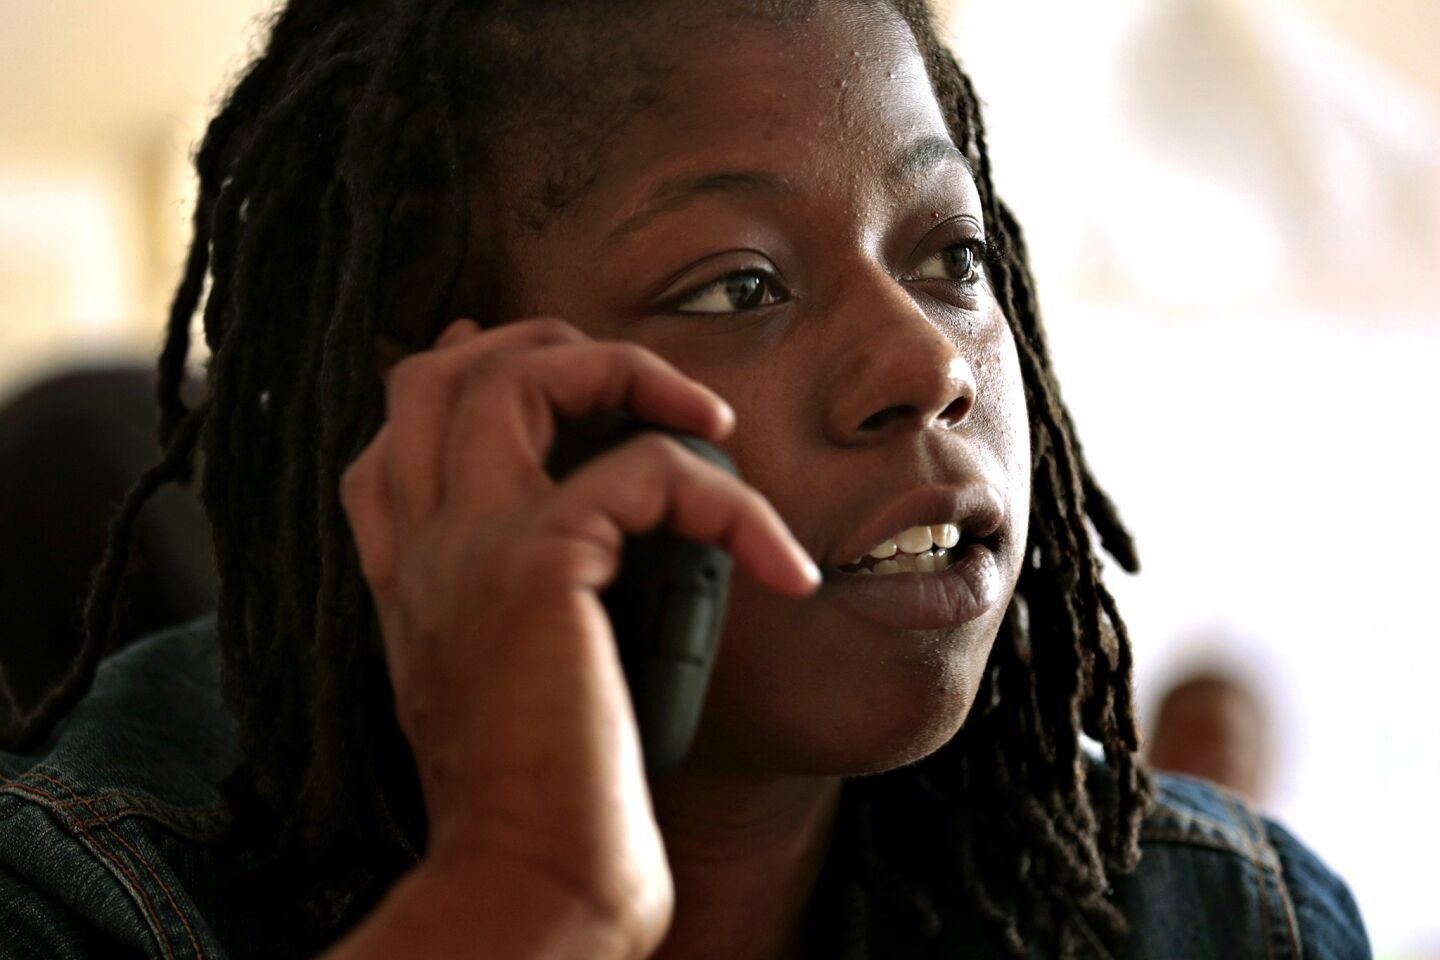 Working from the New York Communities for Change office in Brooklyn on Aug. 27, Naquasia LeGrand calls fast-food restaurant workers to encourage them to take part in a protest two days later.